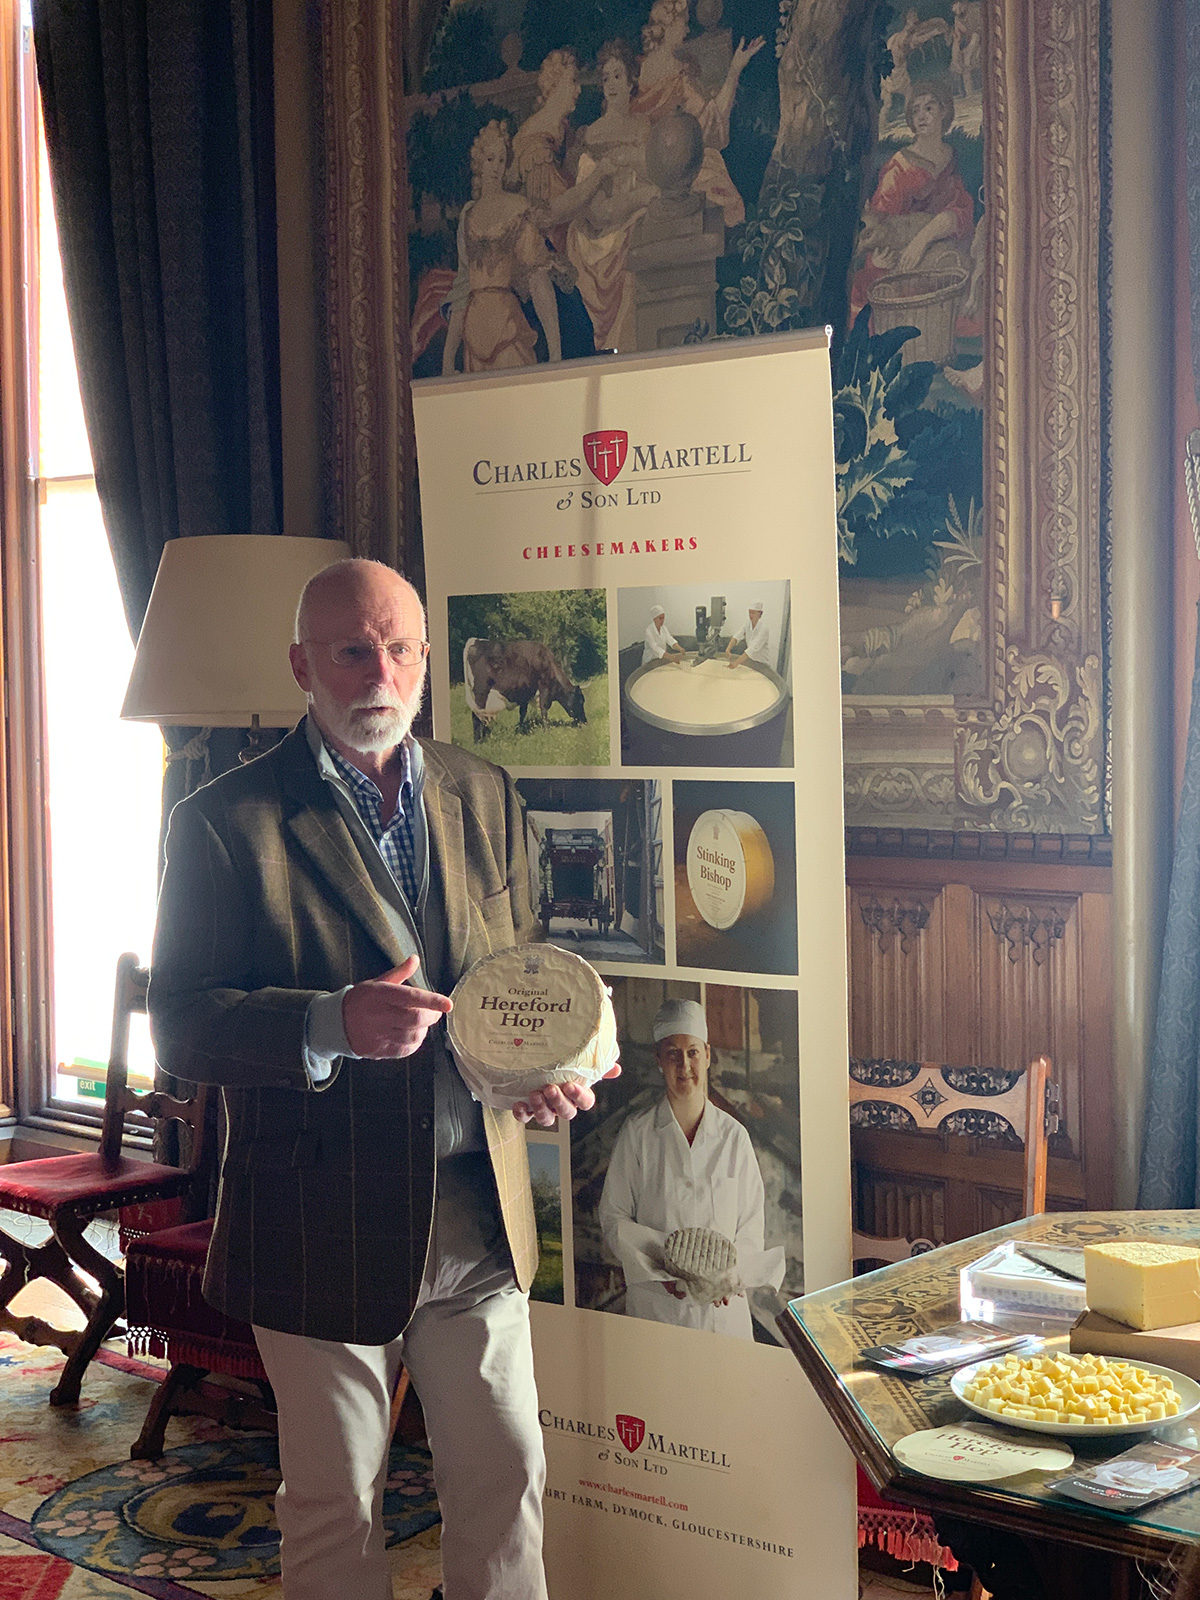 Charles Martell & Son Ltd cheese makers and their famous cheese in Maria Kalenska gastronomy blog